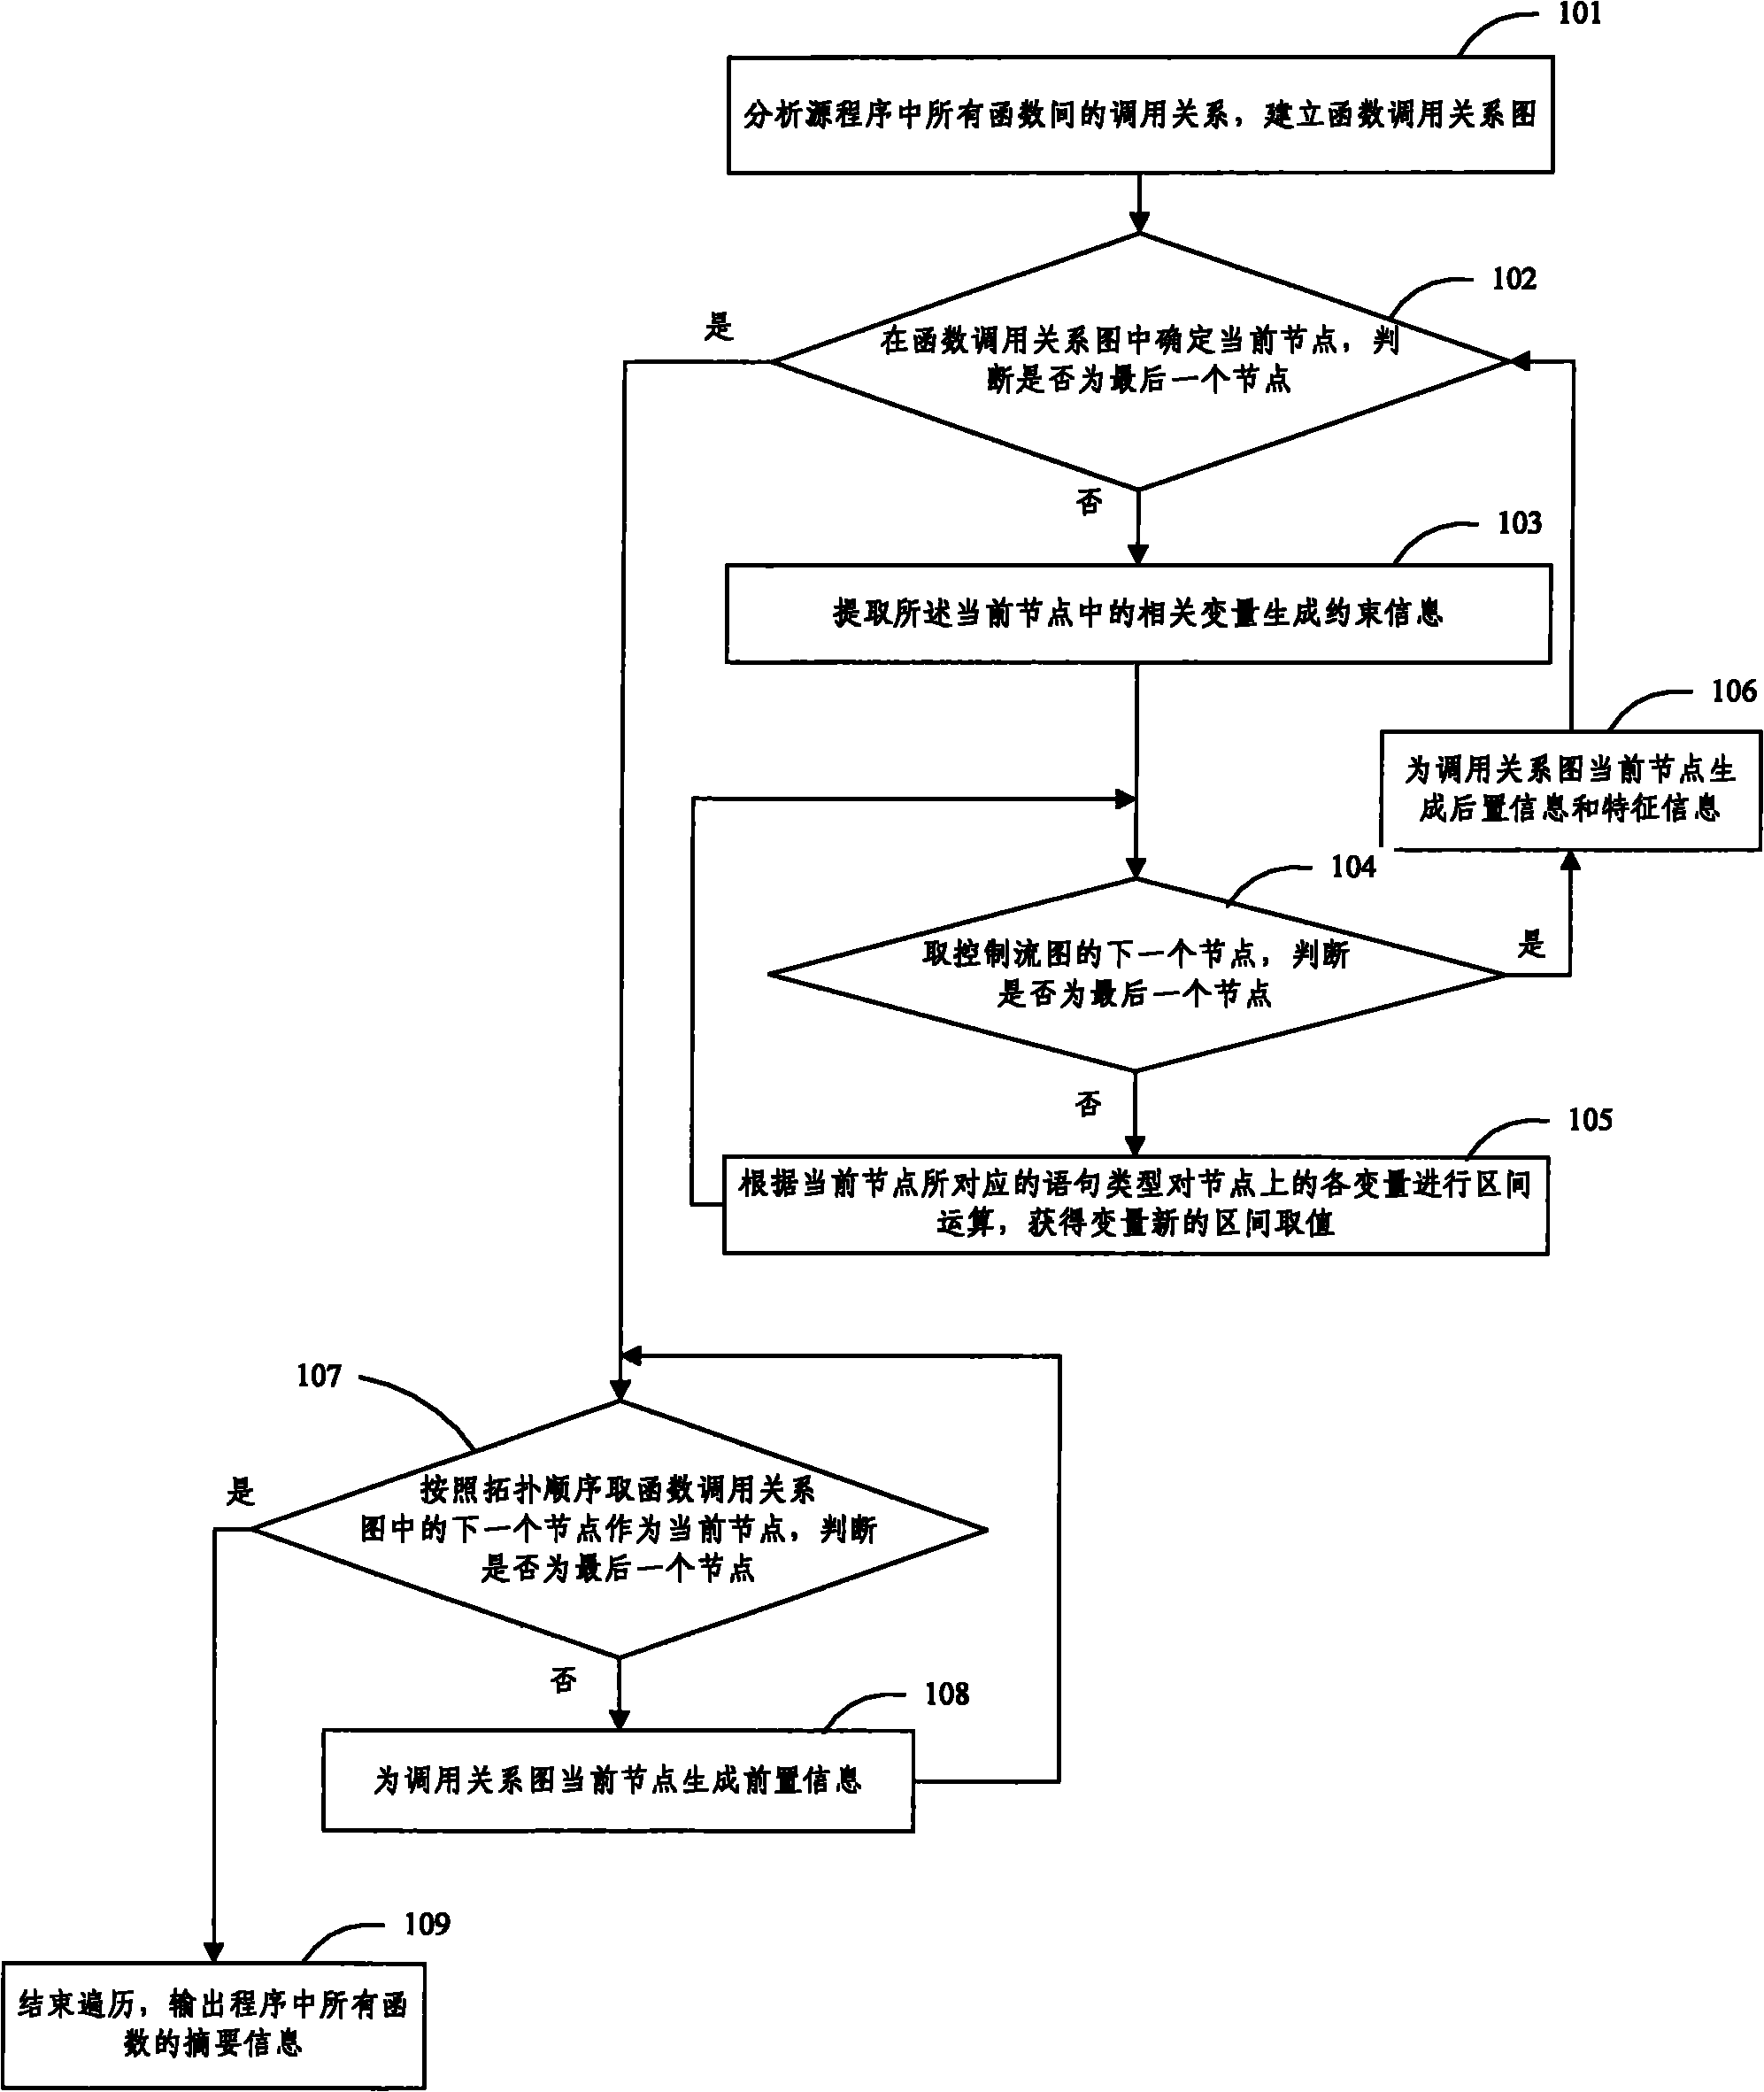 Method for testing software by applying across function analysis